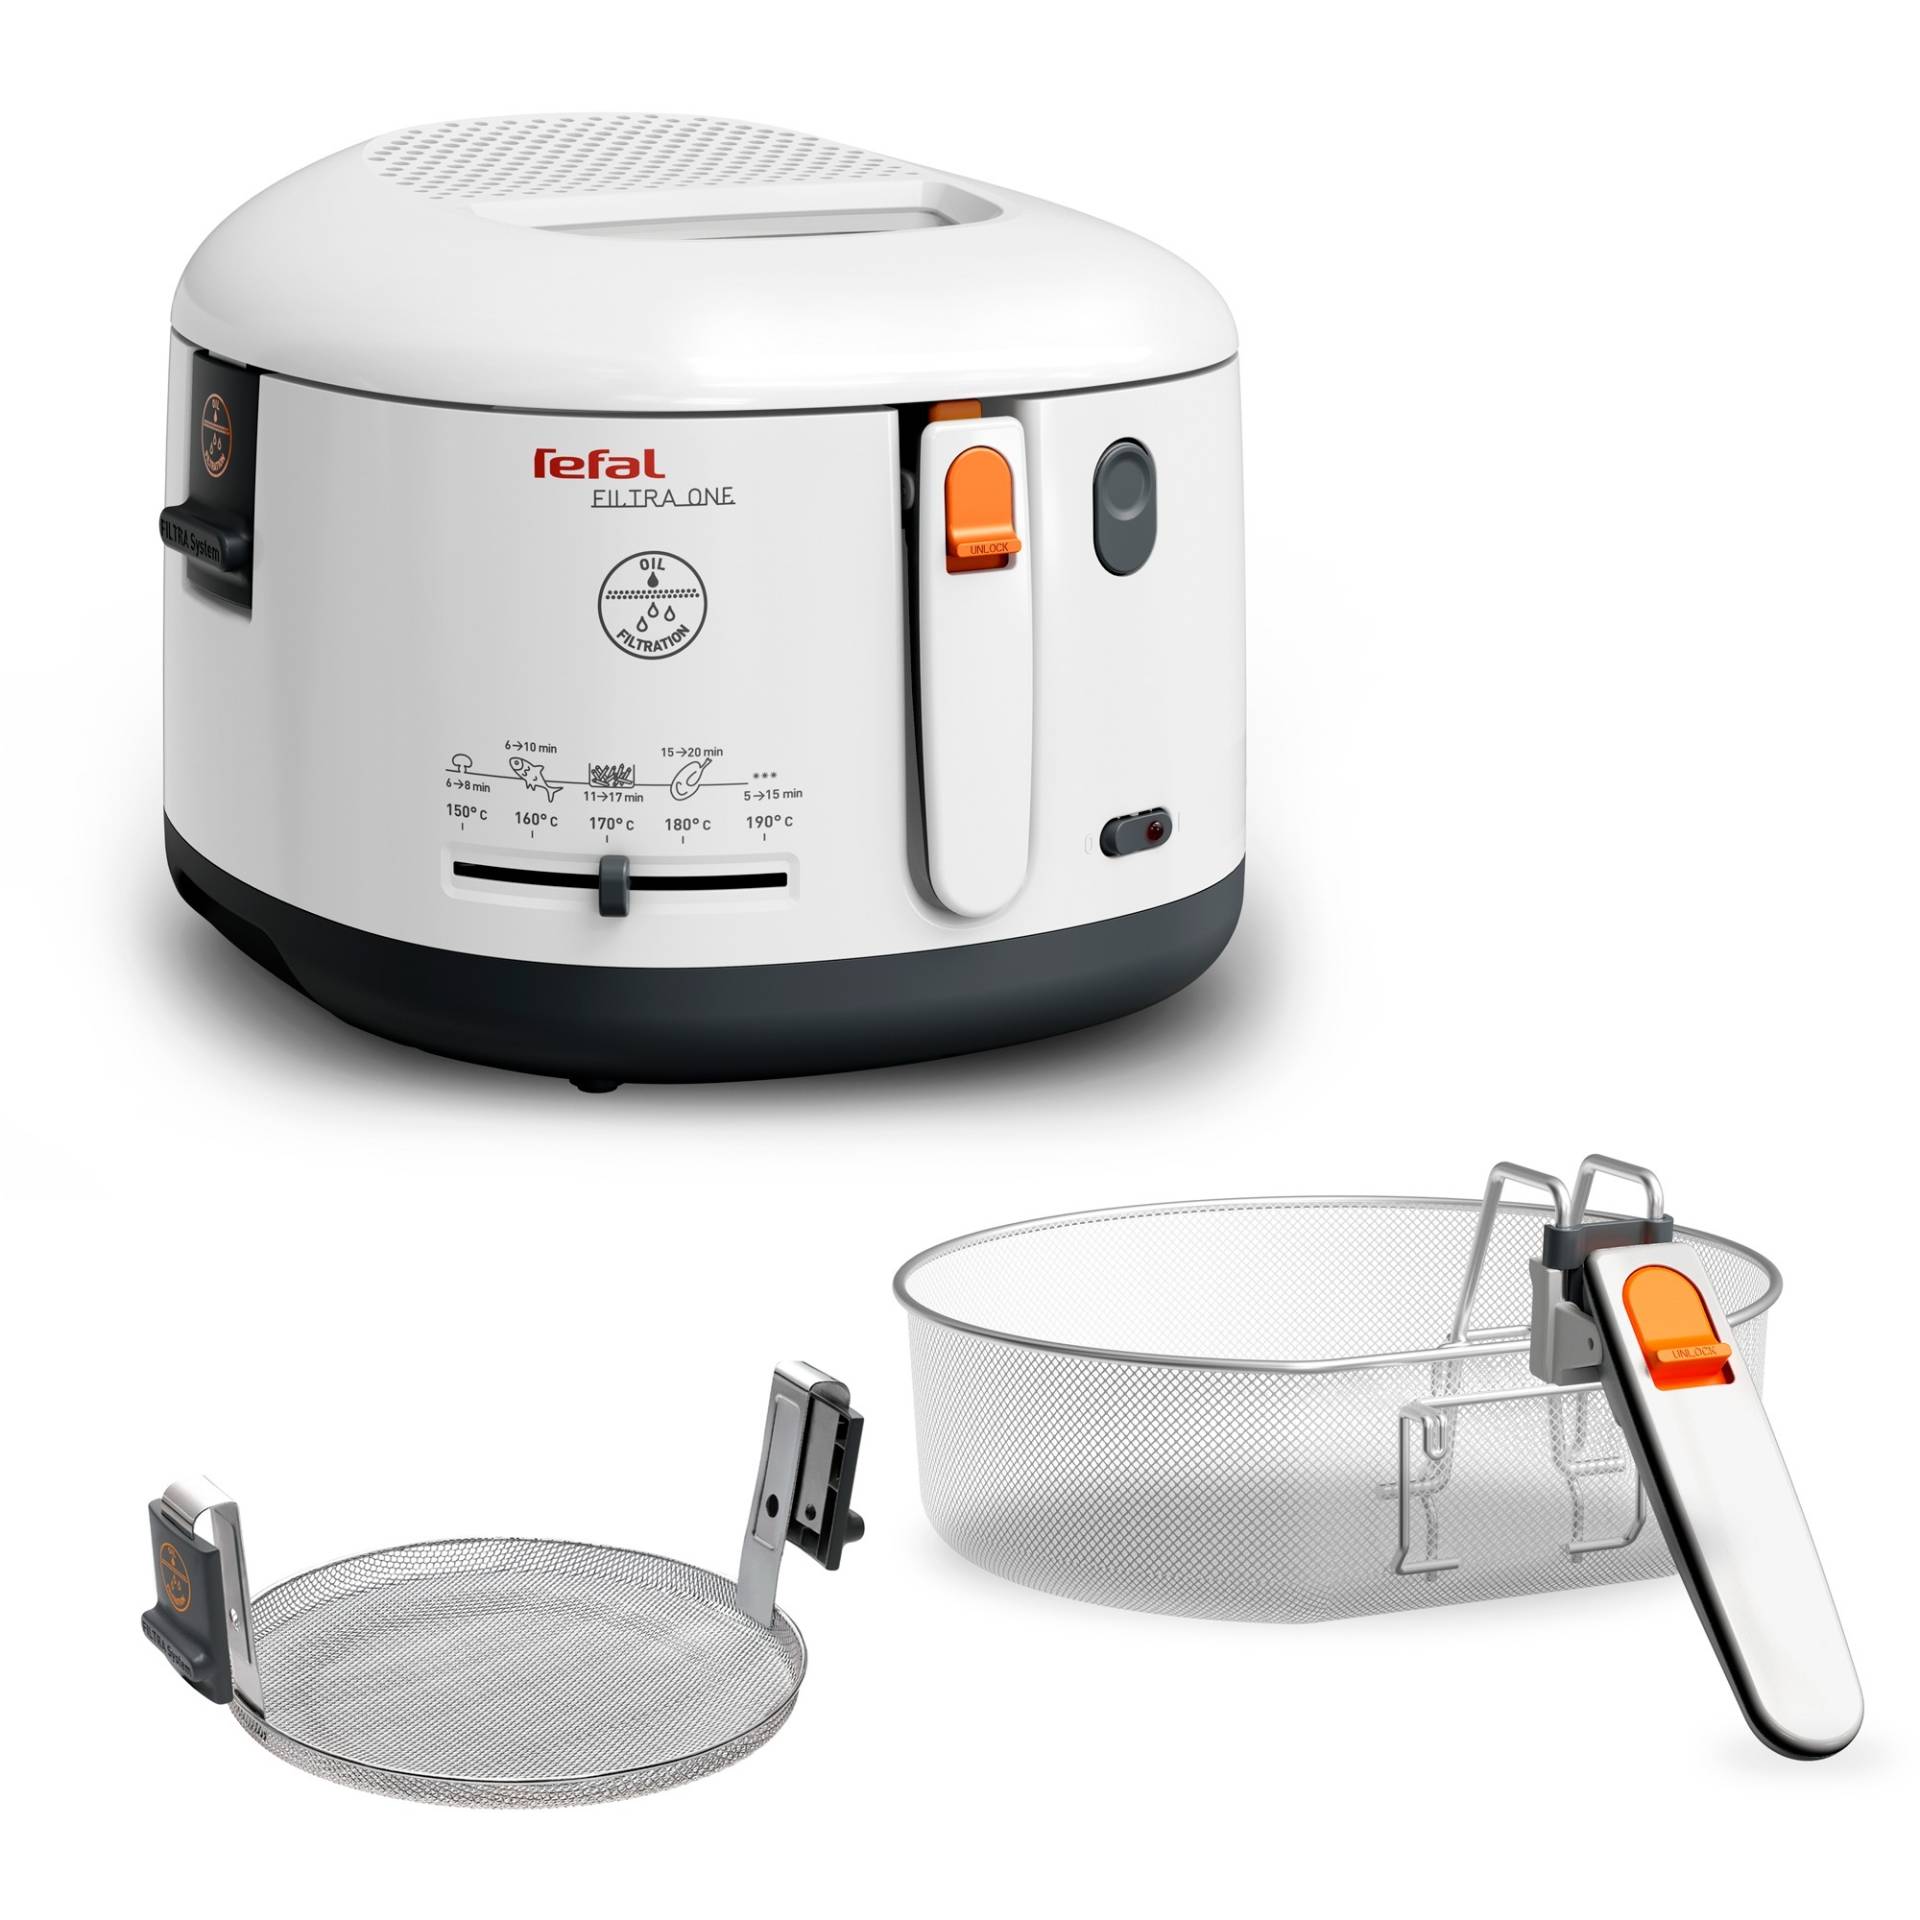 Fritteuse One Filtra FF 1631 von Tefal